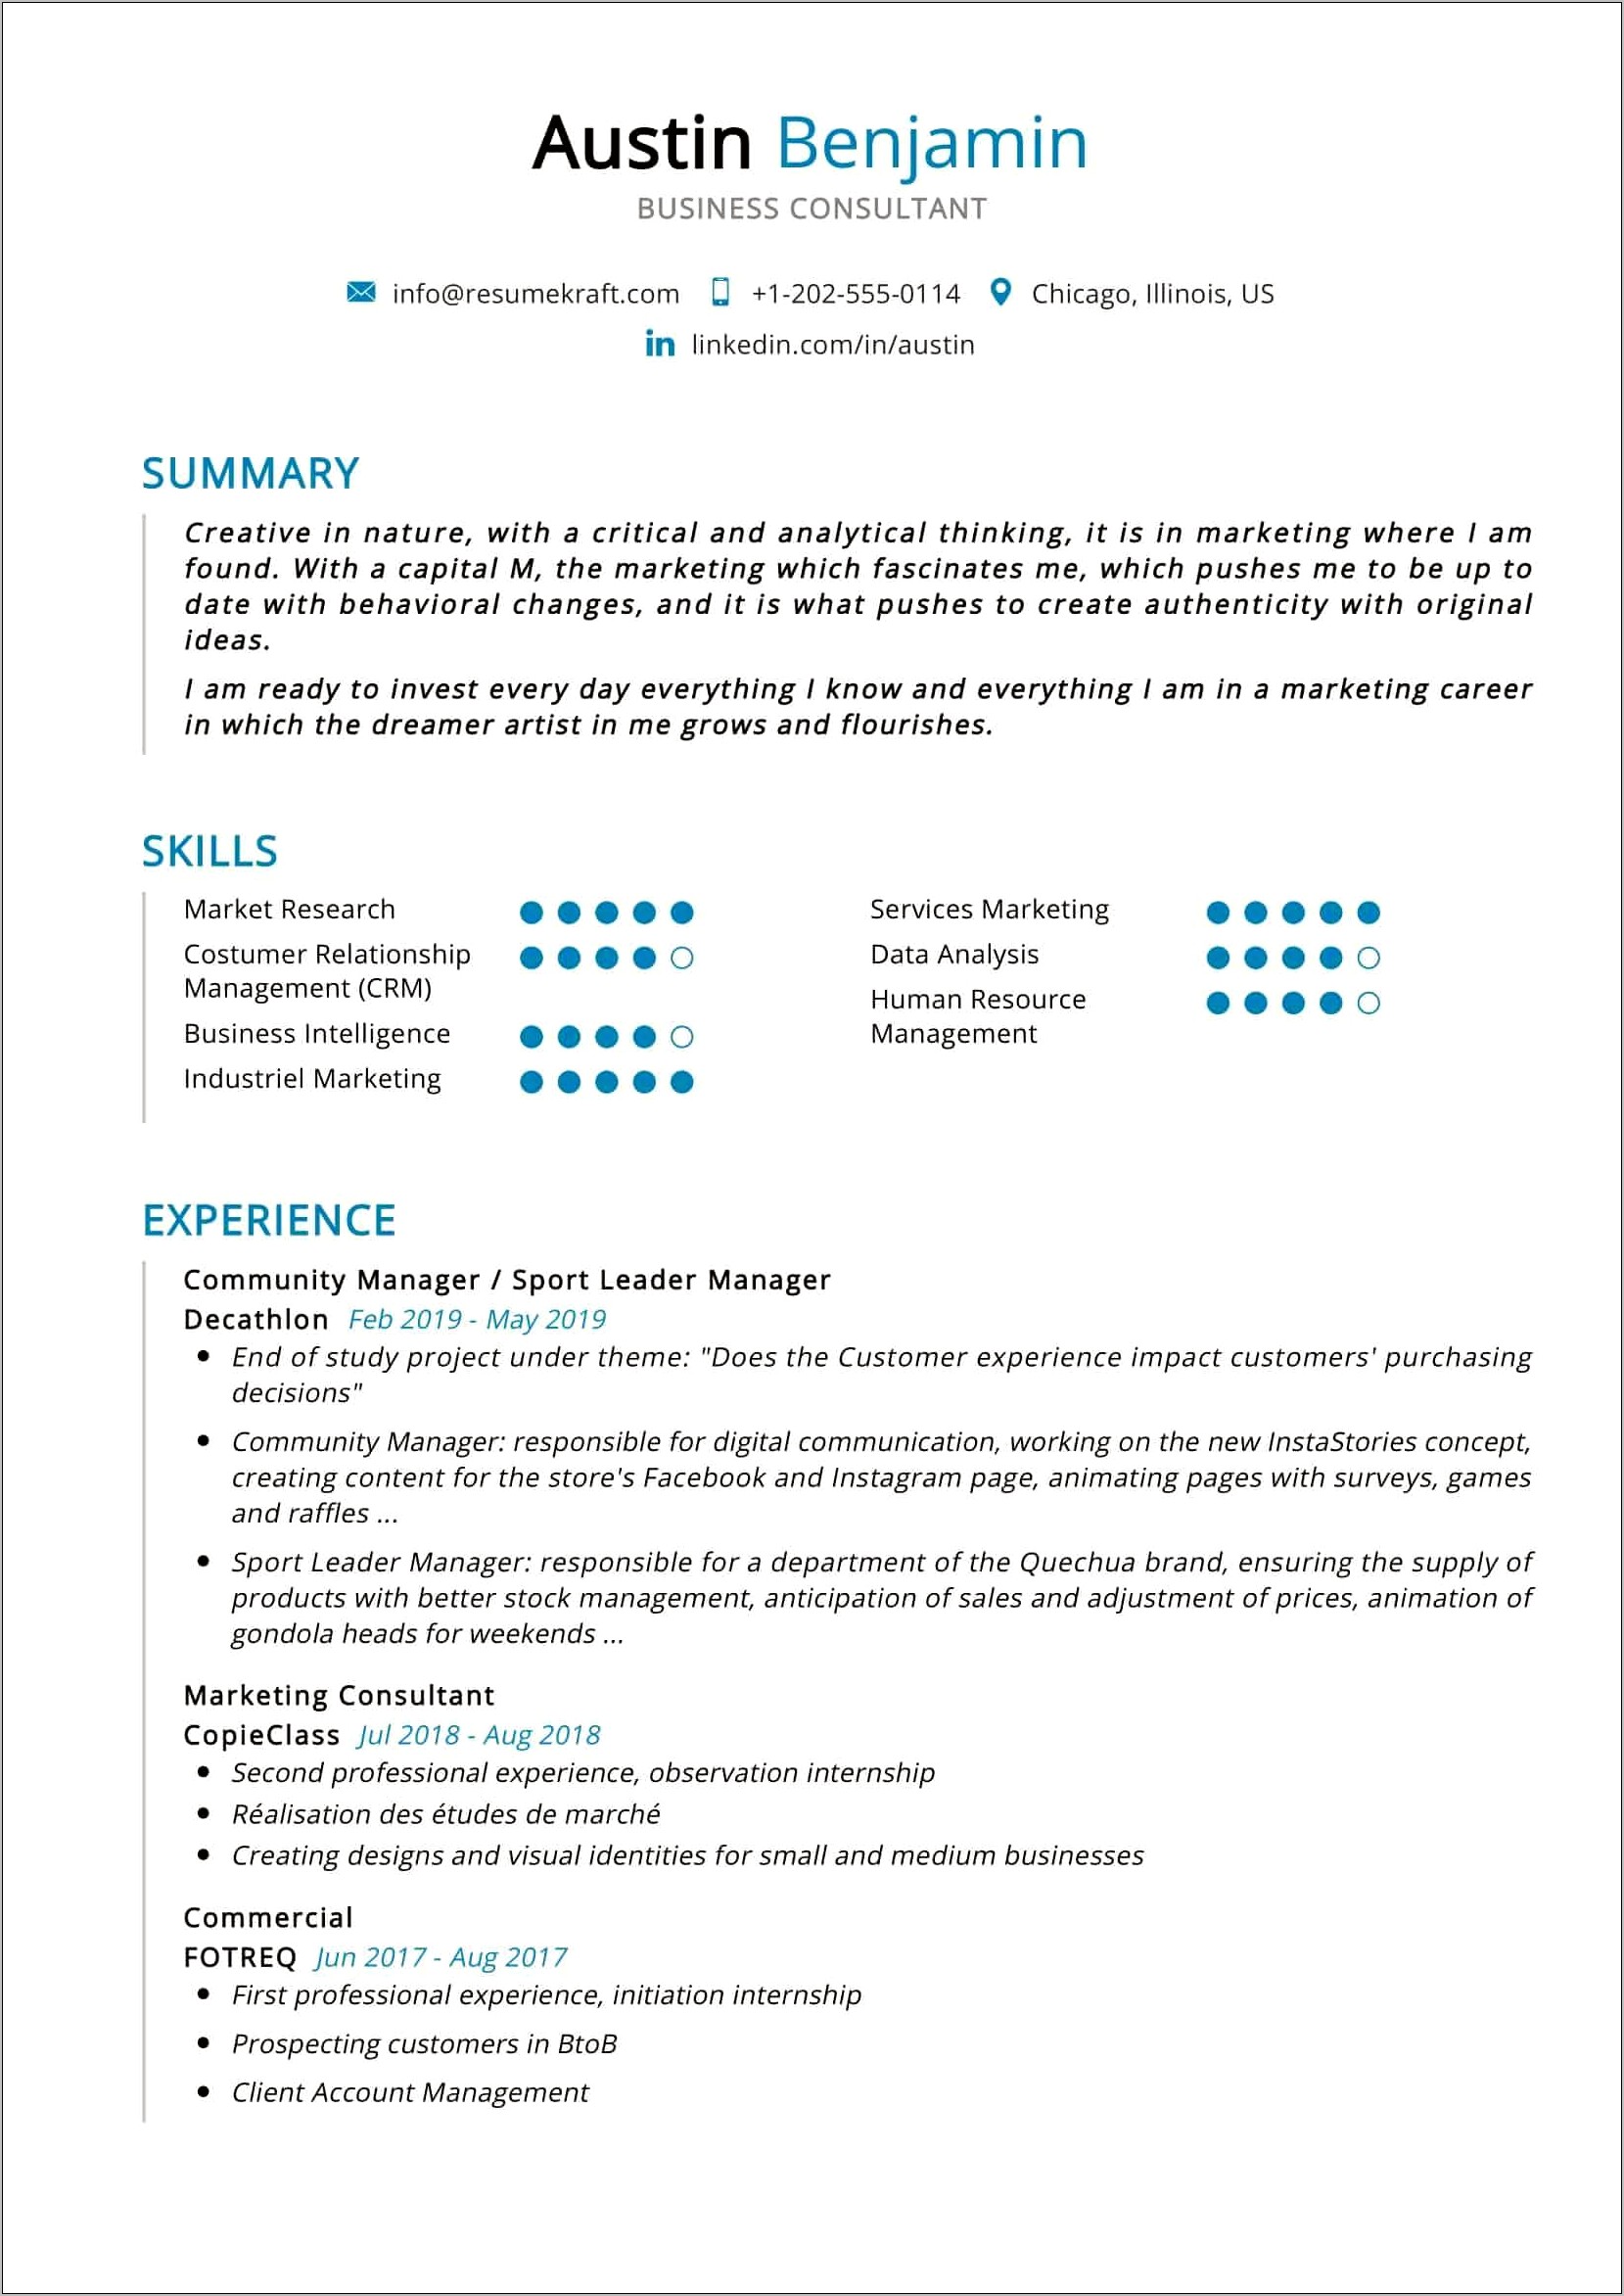 Sample Business Consultant Resume Summary